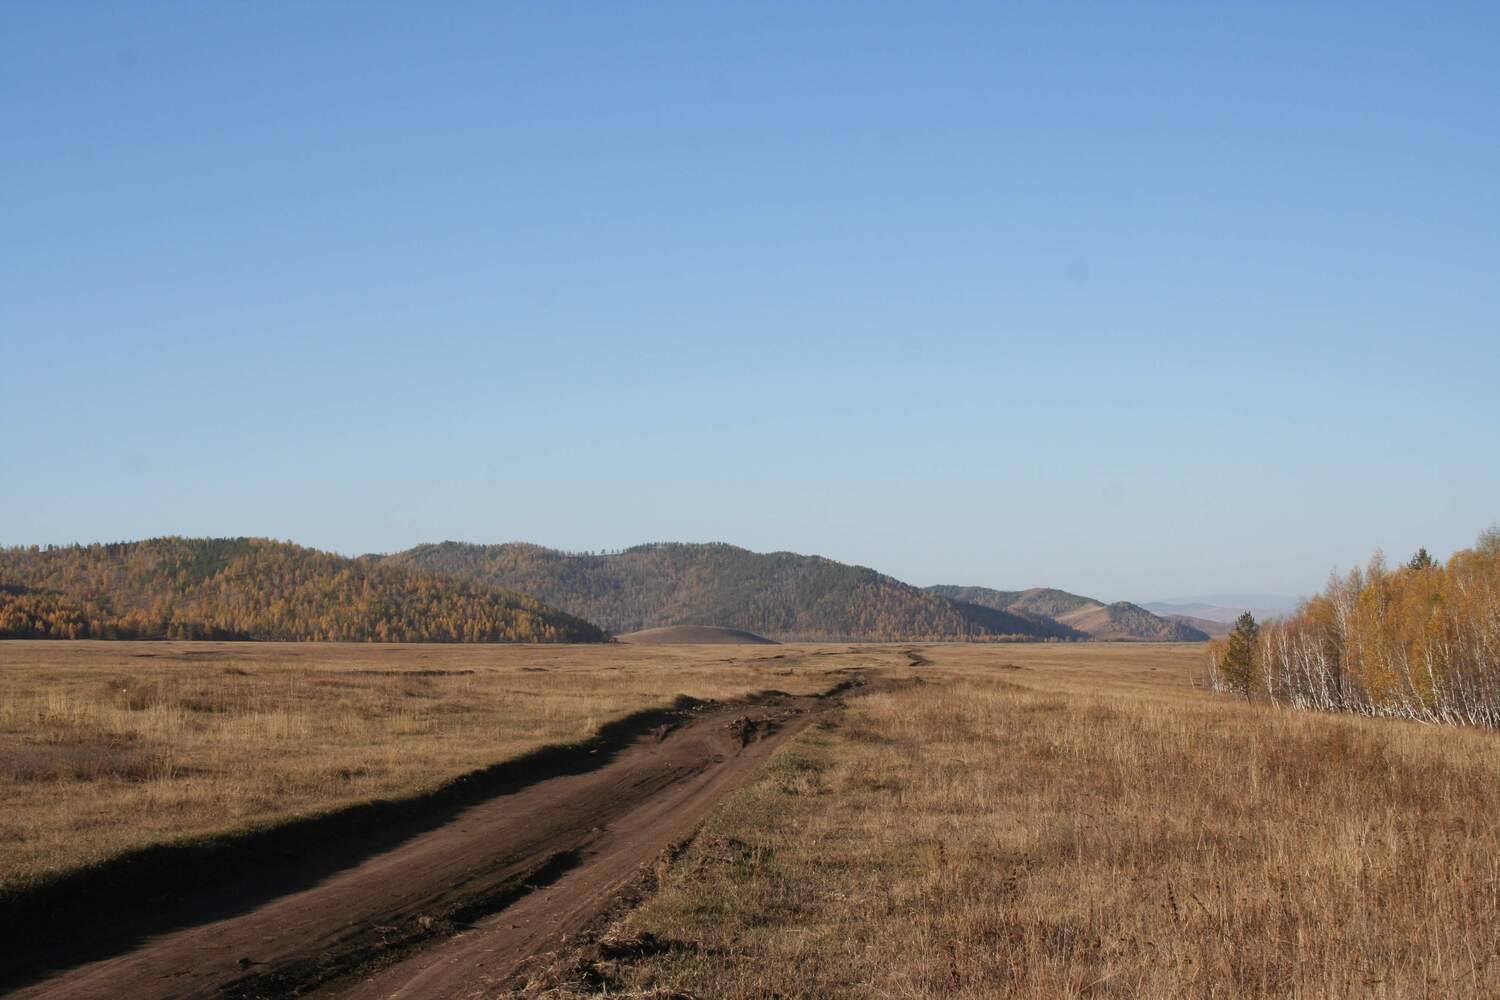 Taiga forests dominated by a few tree species and grasslands span vast areas of the northern hemisphere. Here: Northern Mongolia.